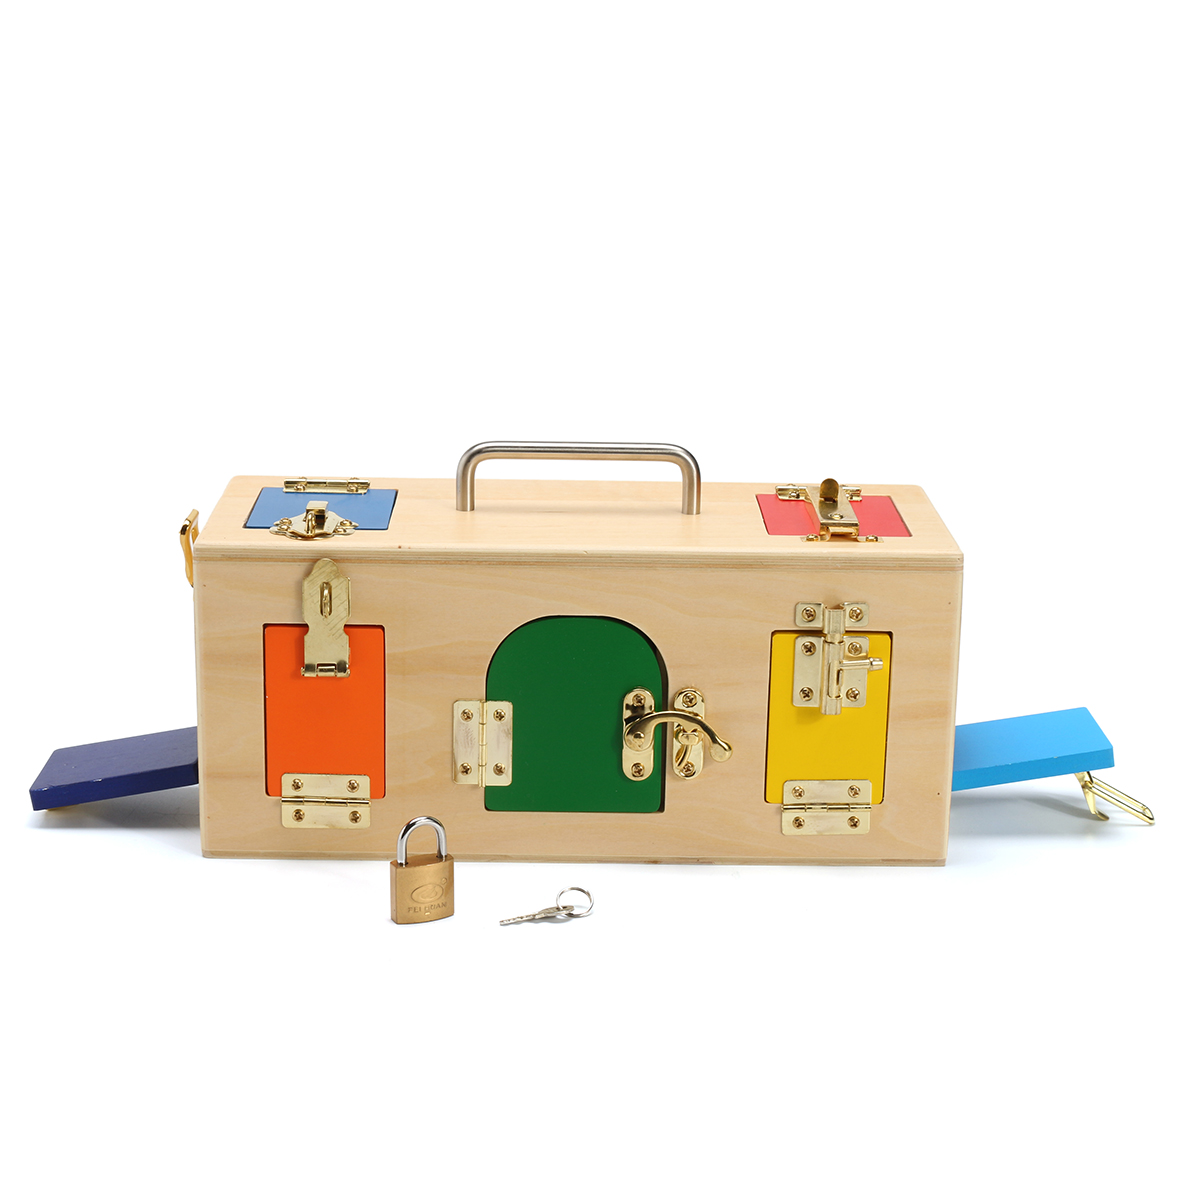 Kids-Life-Skill-Learning-Wooden-Montessori-Practical-Wood-Lock-Box-Educational-Science-Toys-1392942-5